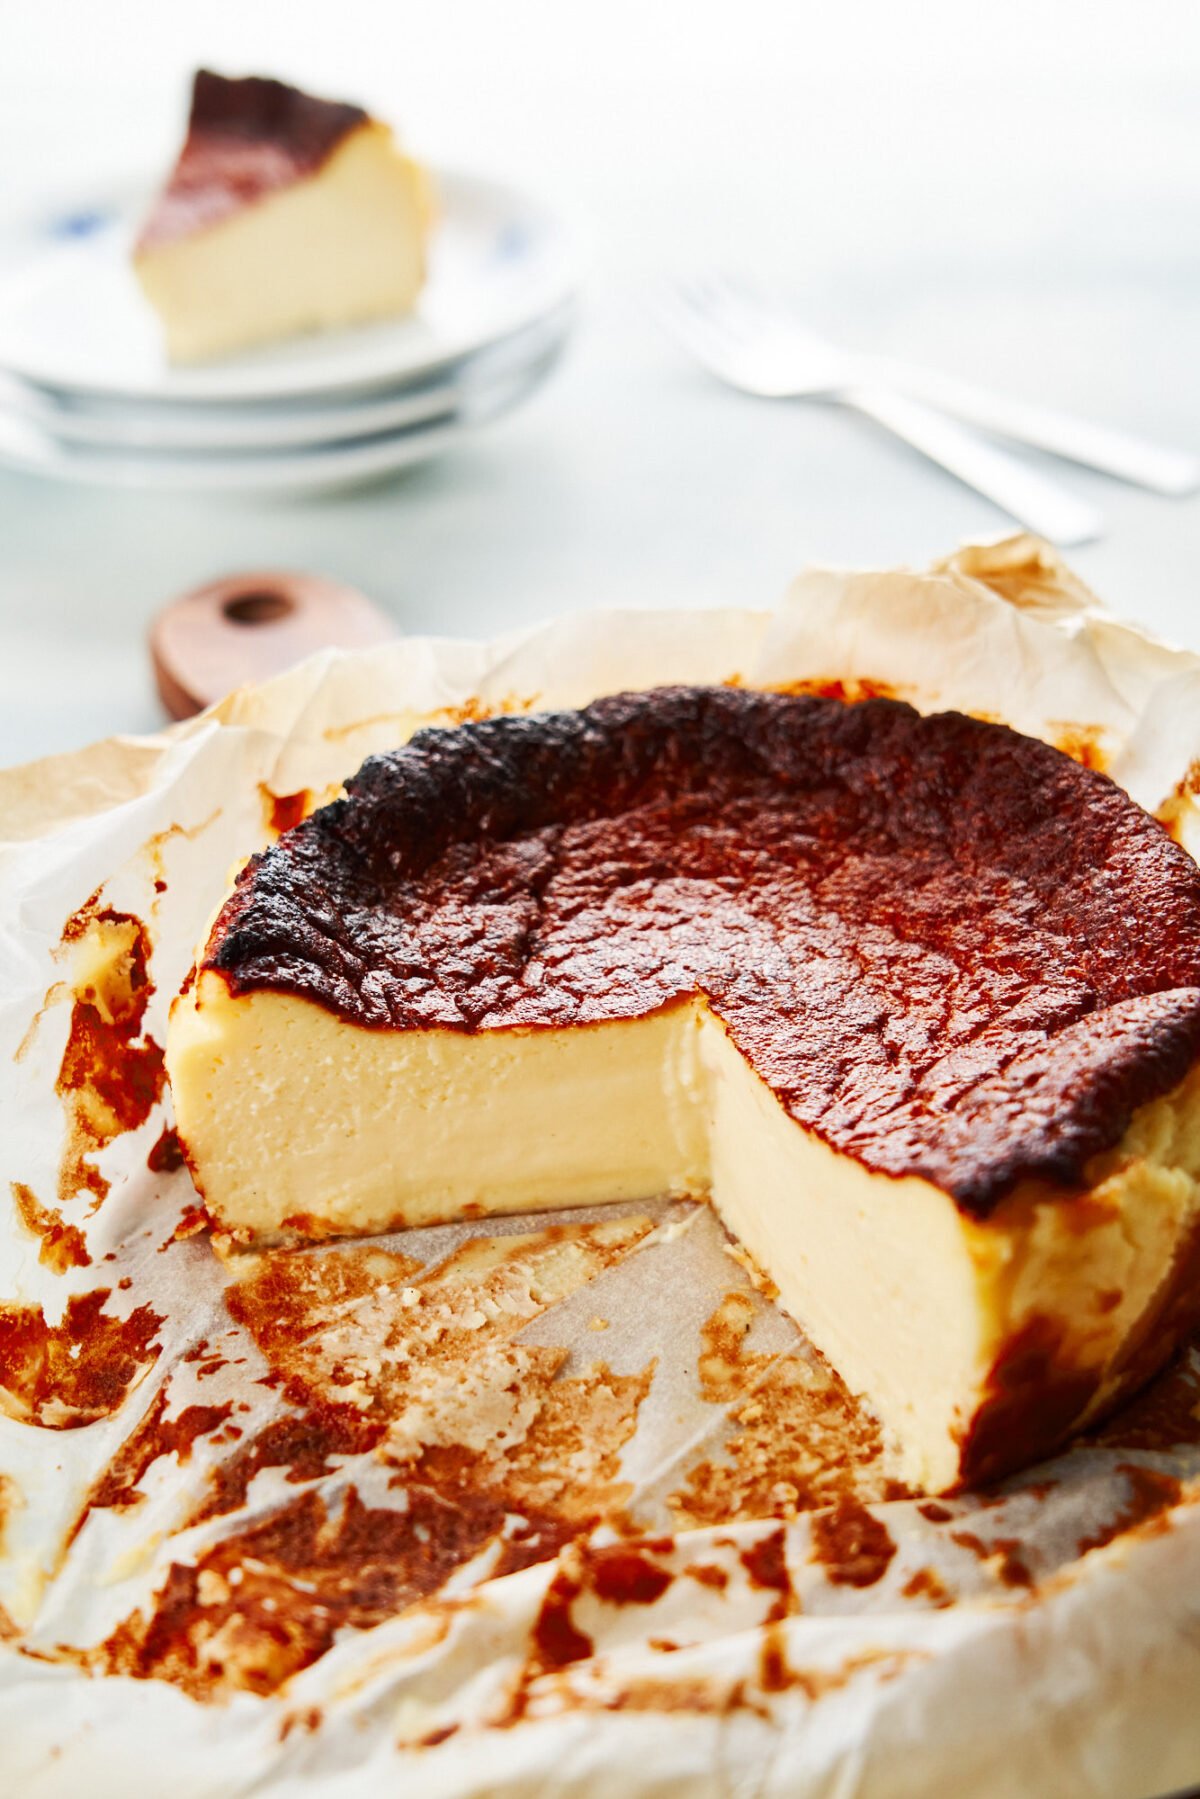 With a smooth custardy center and caramelized top, this ridiculously simple Burnt Basque Cheesecake recipe comes together from a handful of ingredients in a matter of minutes.